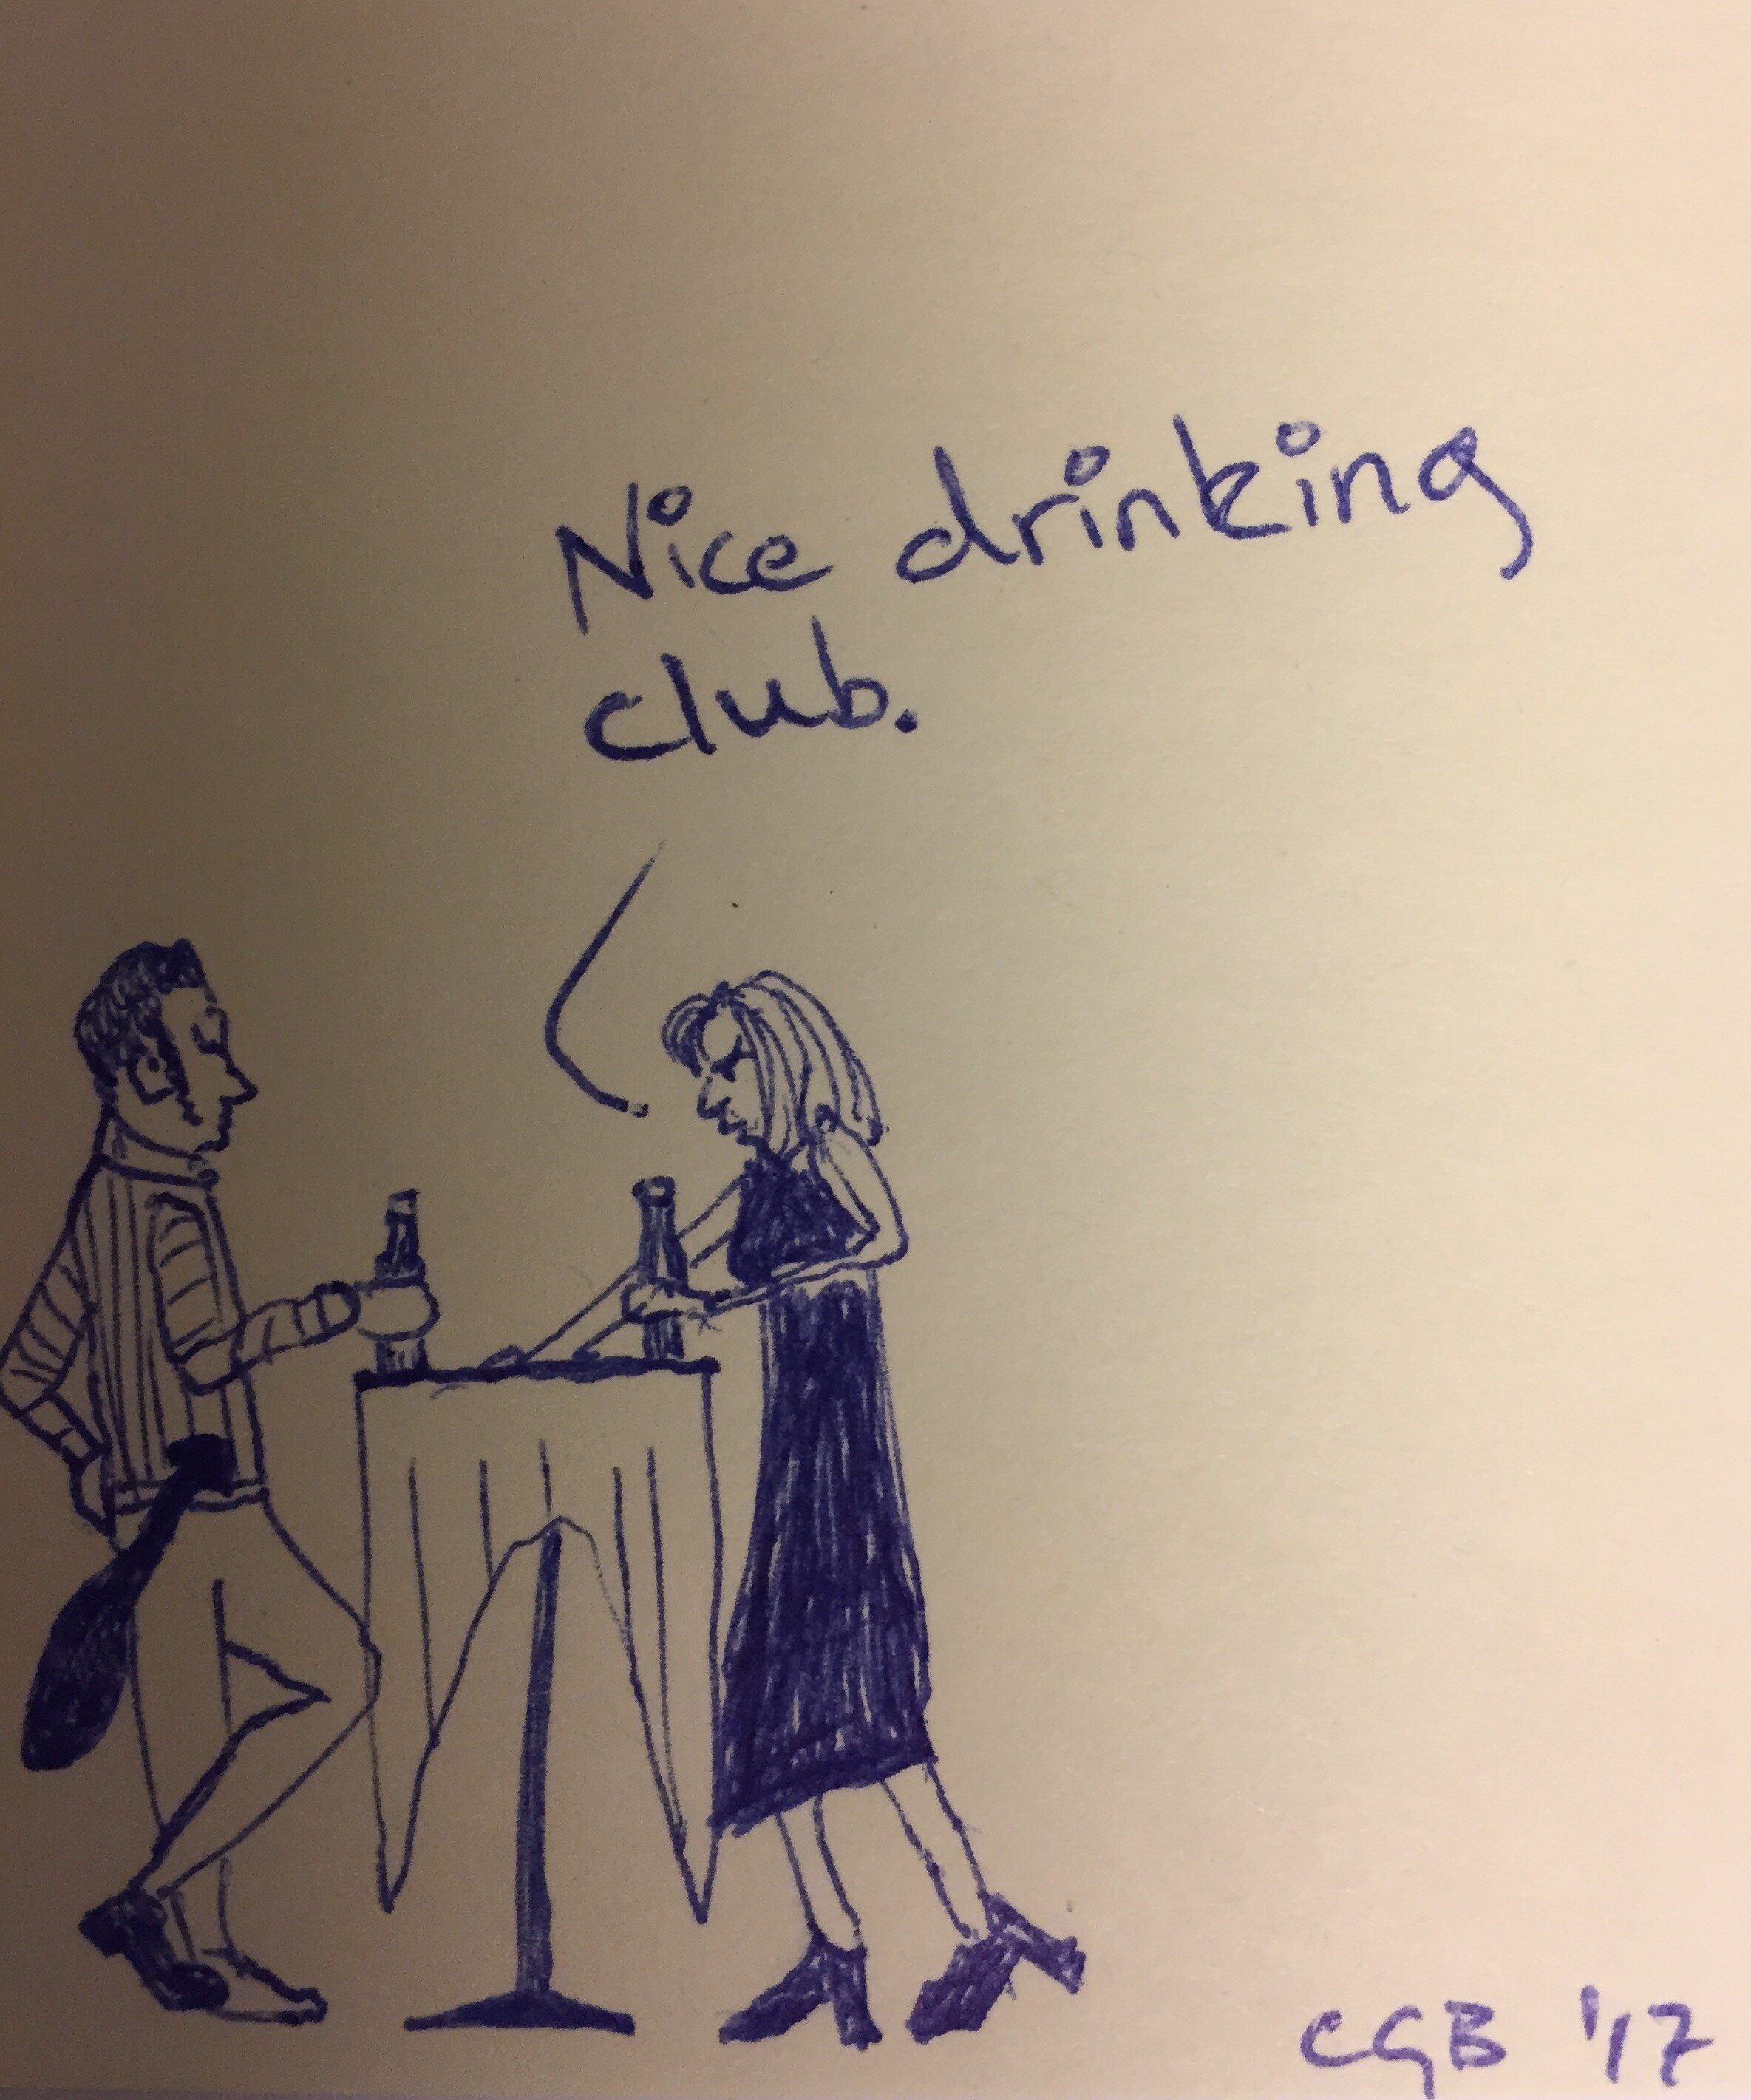 "How to Flirt at Drinking Club"